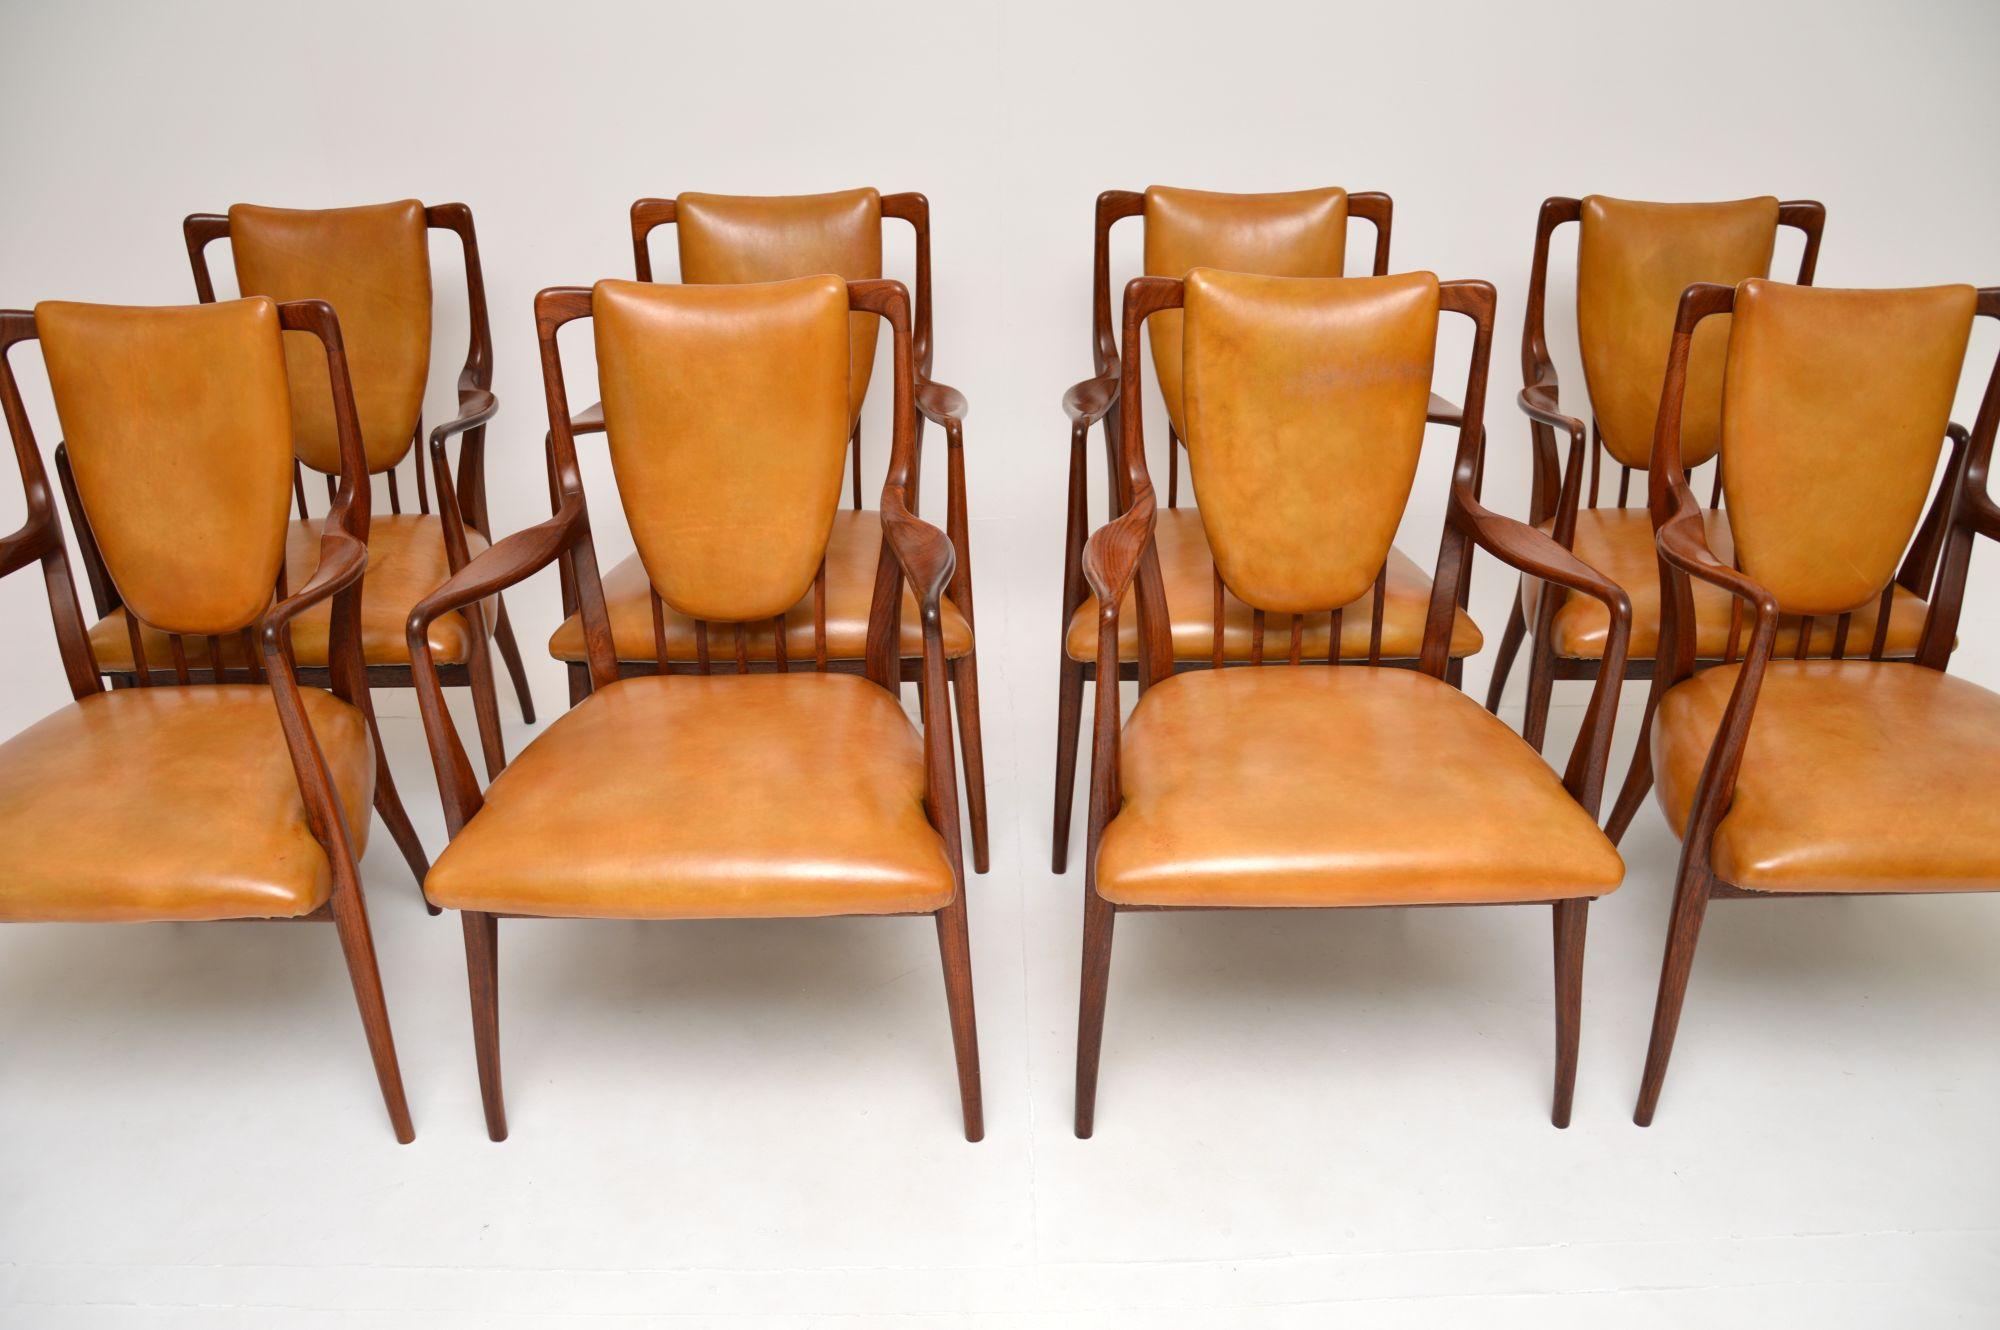 A spectacular and very rare set of eight vintage dining chairs by A.J Milne. They were made in England and retailed by Heals in the 1950’s.

They are of amazing quality, and have an incredibly beautiful design, with stunning organic curves. They